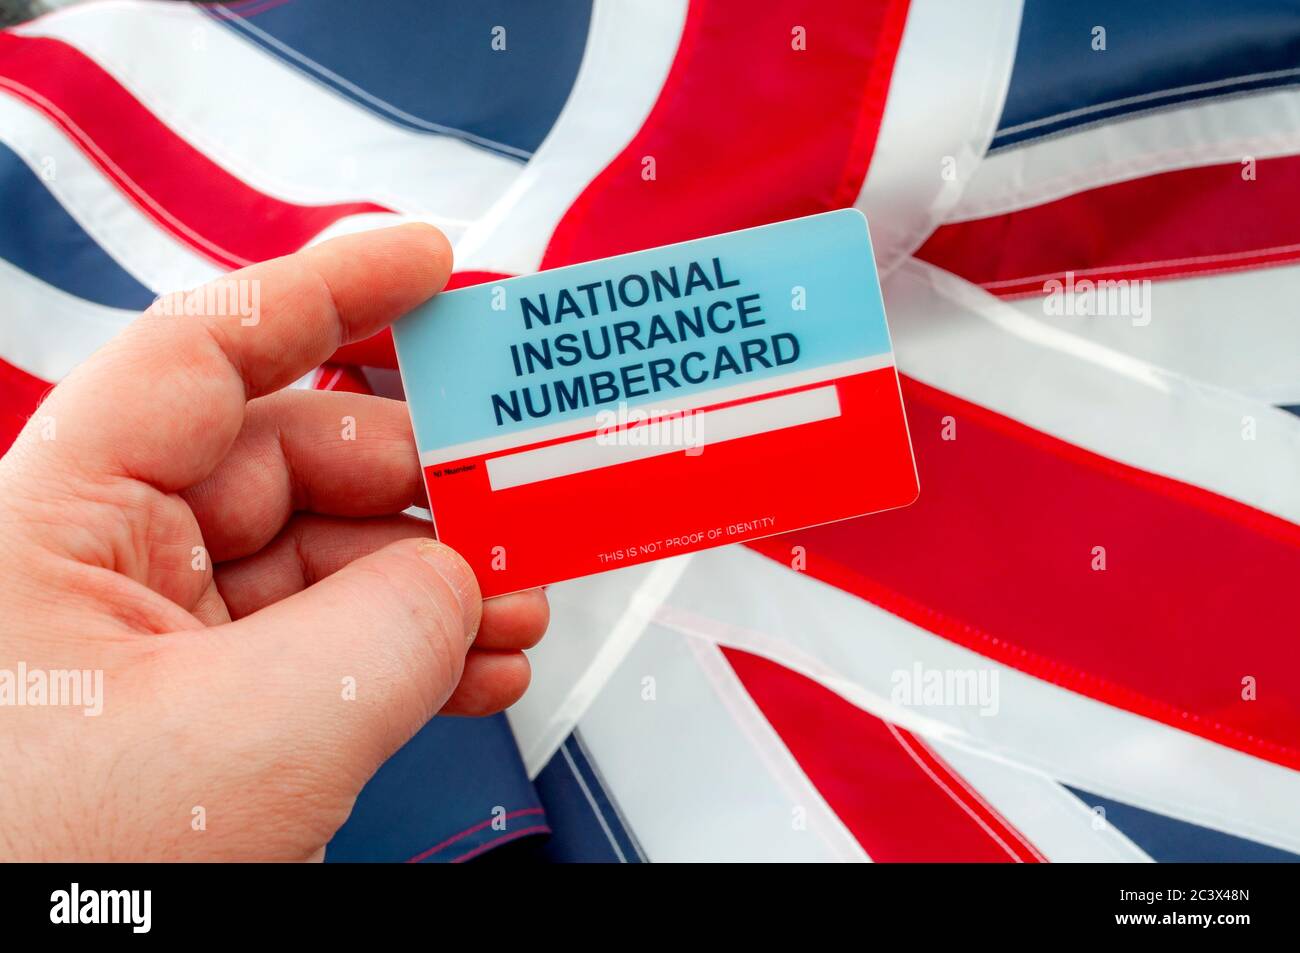 Social security system, access to safety net programs in Great Britain concept theme with a blank National Insurance Number card or NINO held in one Stock Photo